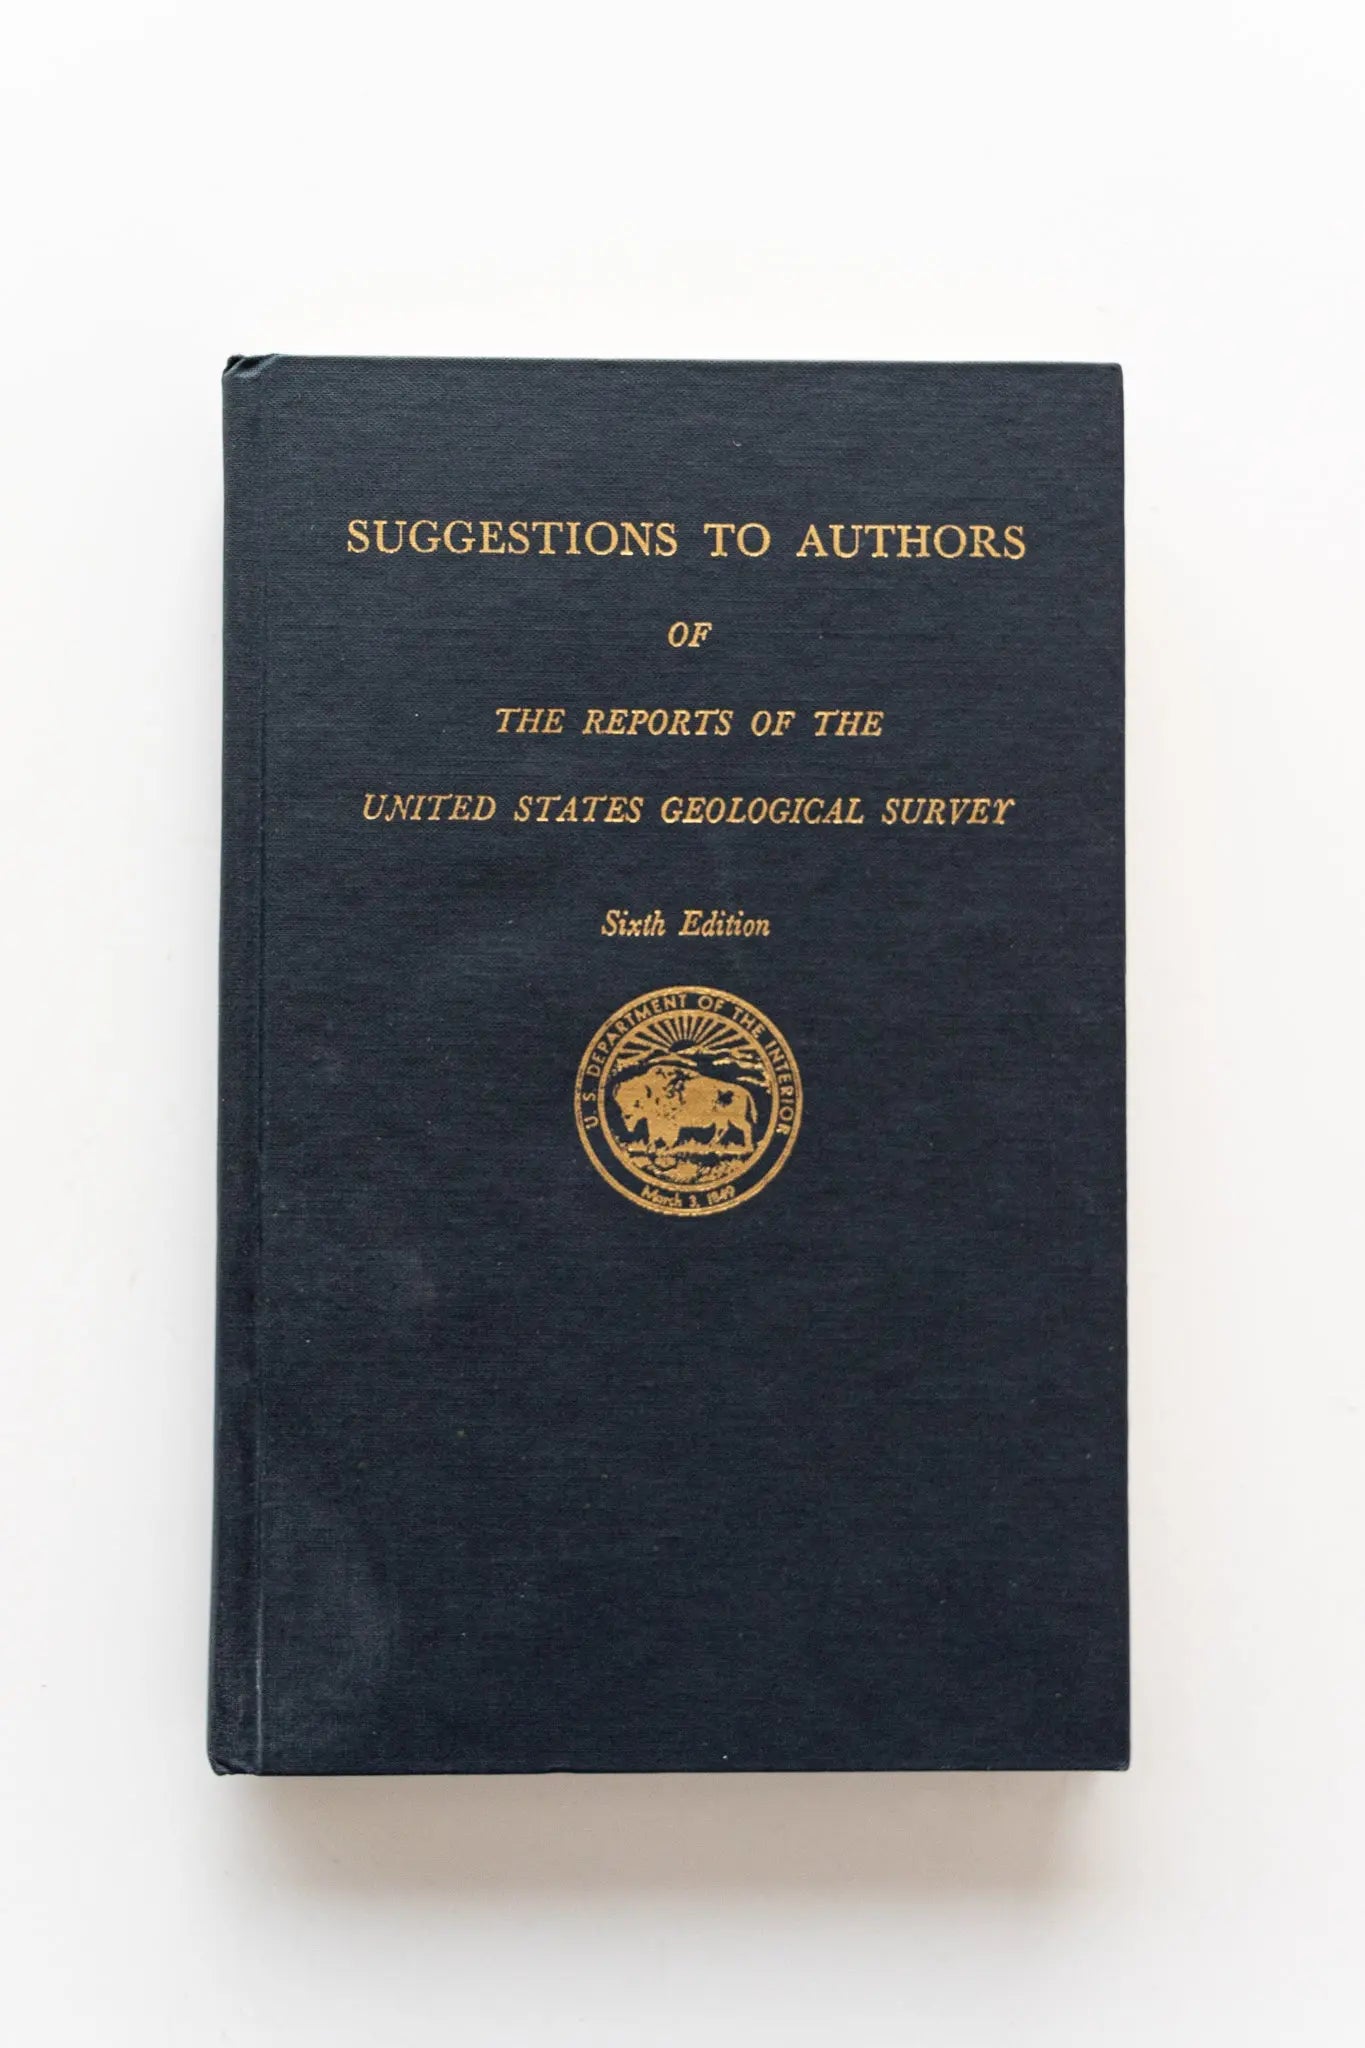 Suggestions to Authors: Of the Reports of the United States Geological Survey - Stemcell Science Shop